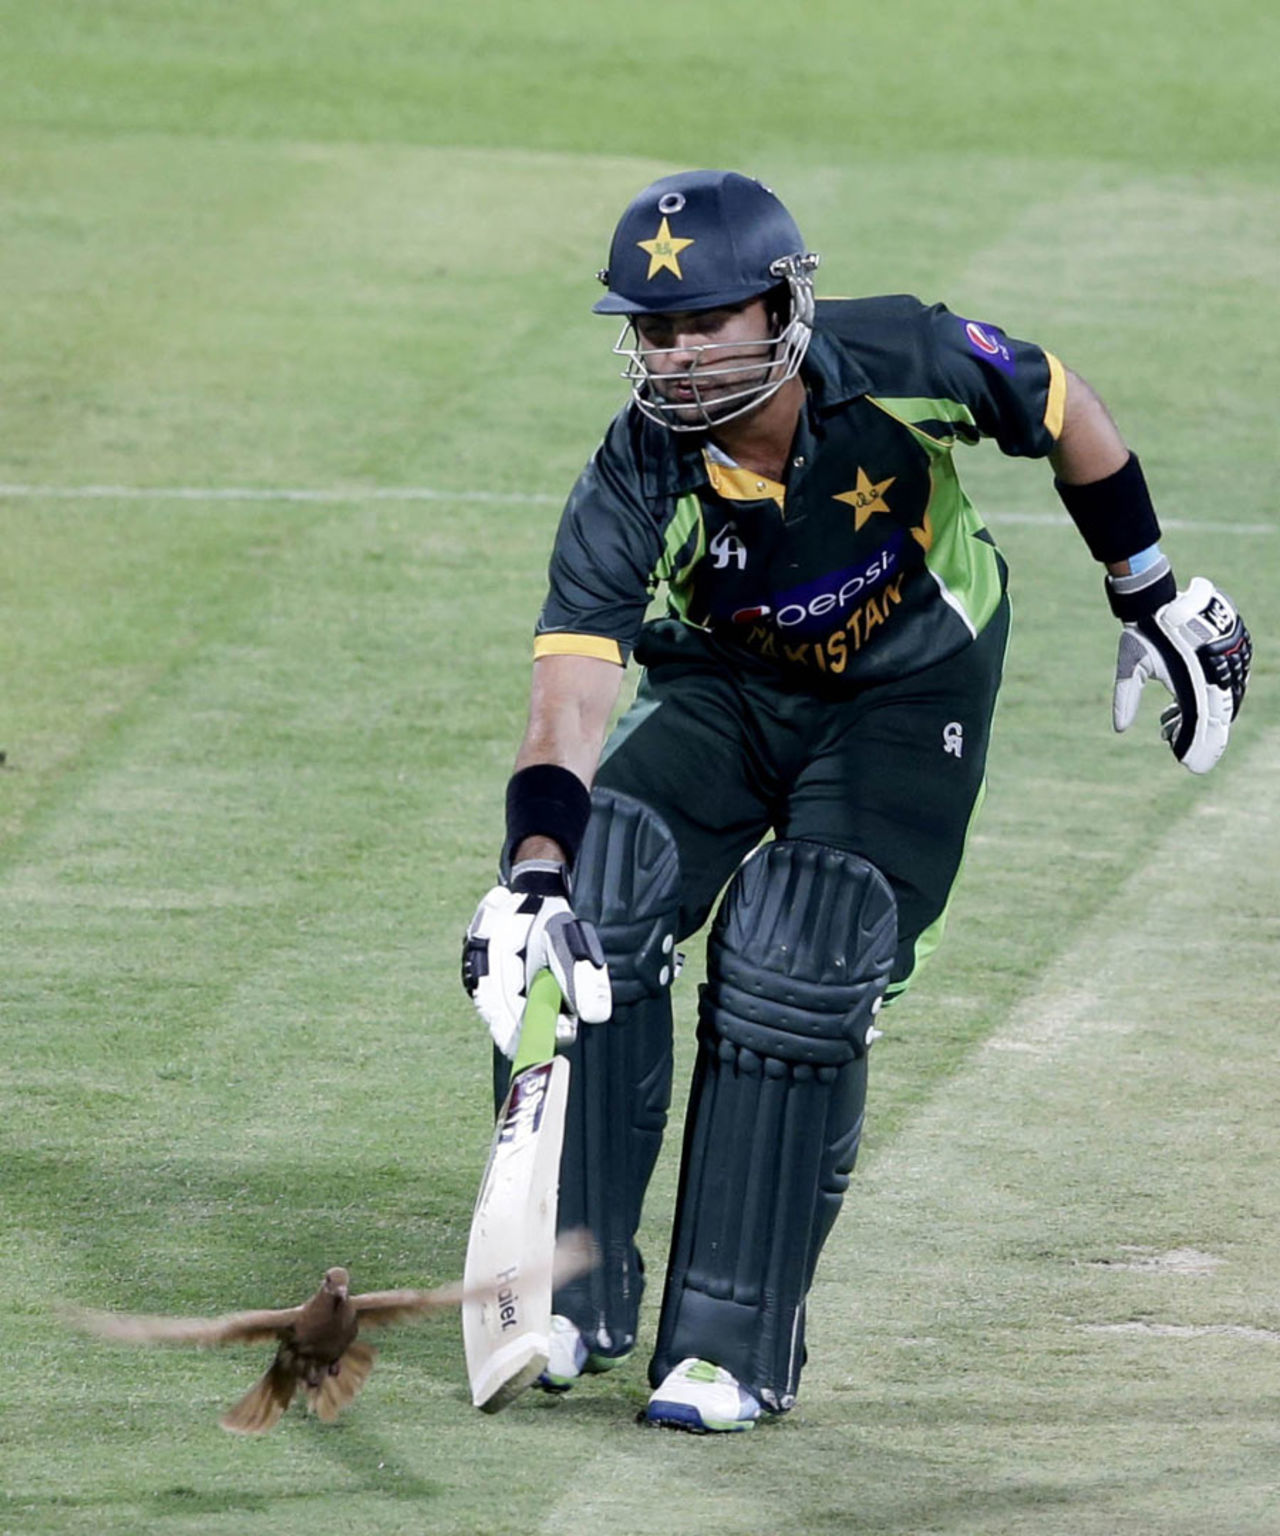 Ahmed Shehzad tries to get rid of a pigeon on the pitch, Pakistan v South Africa, 5th ODI, Sharjah, November 11, 2013